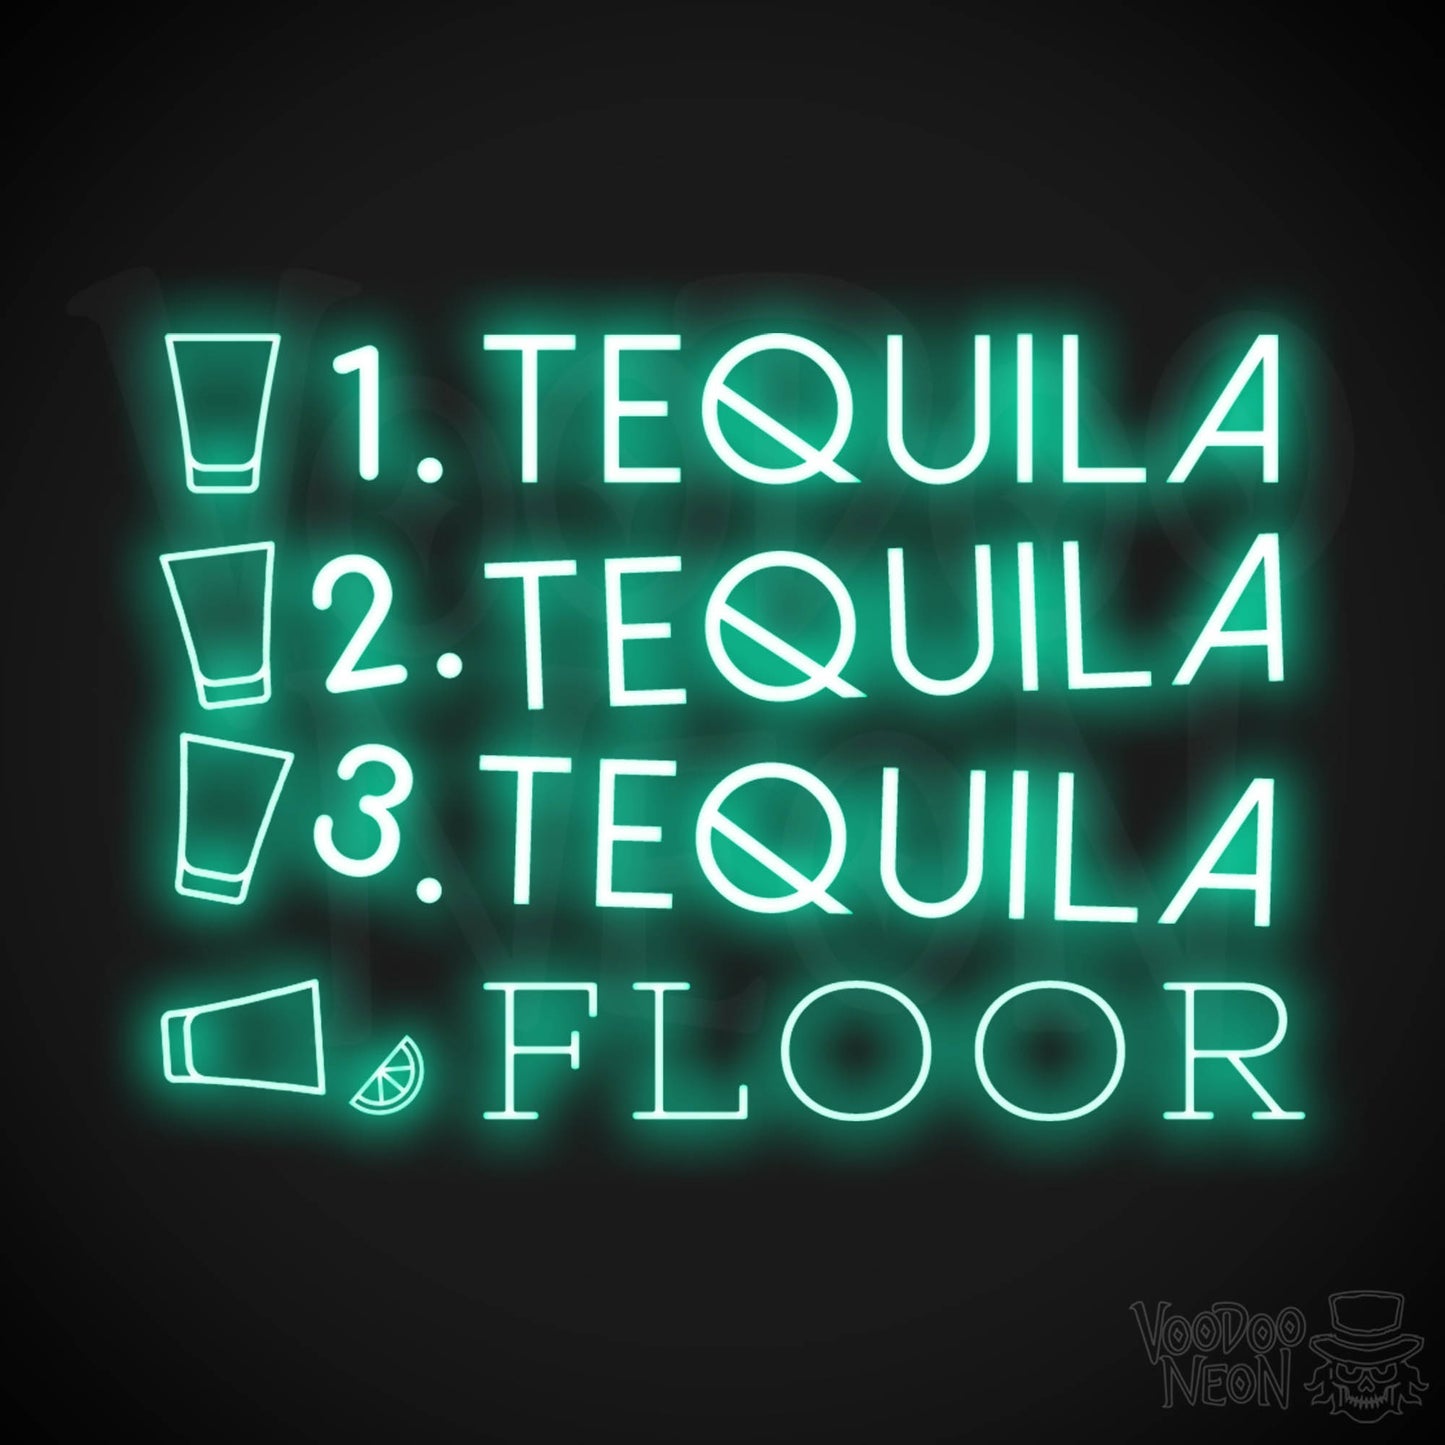 One Tequila Two Tequila Three Tequila Floor Neon sign - Neon Wall Art - Color Light Green